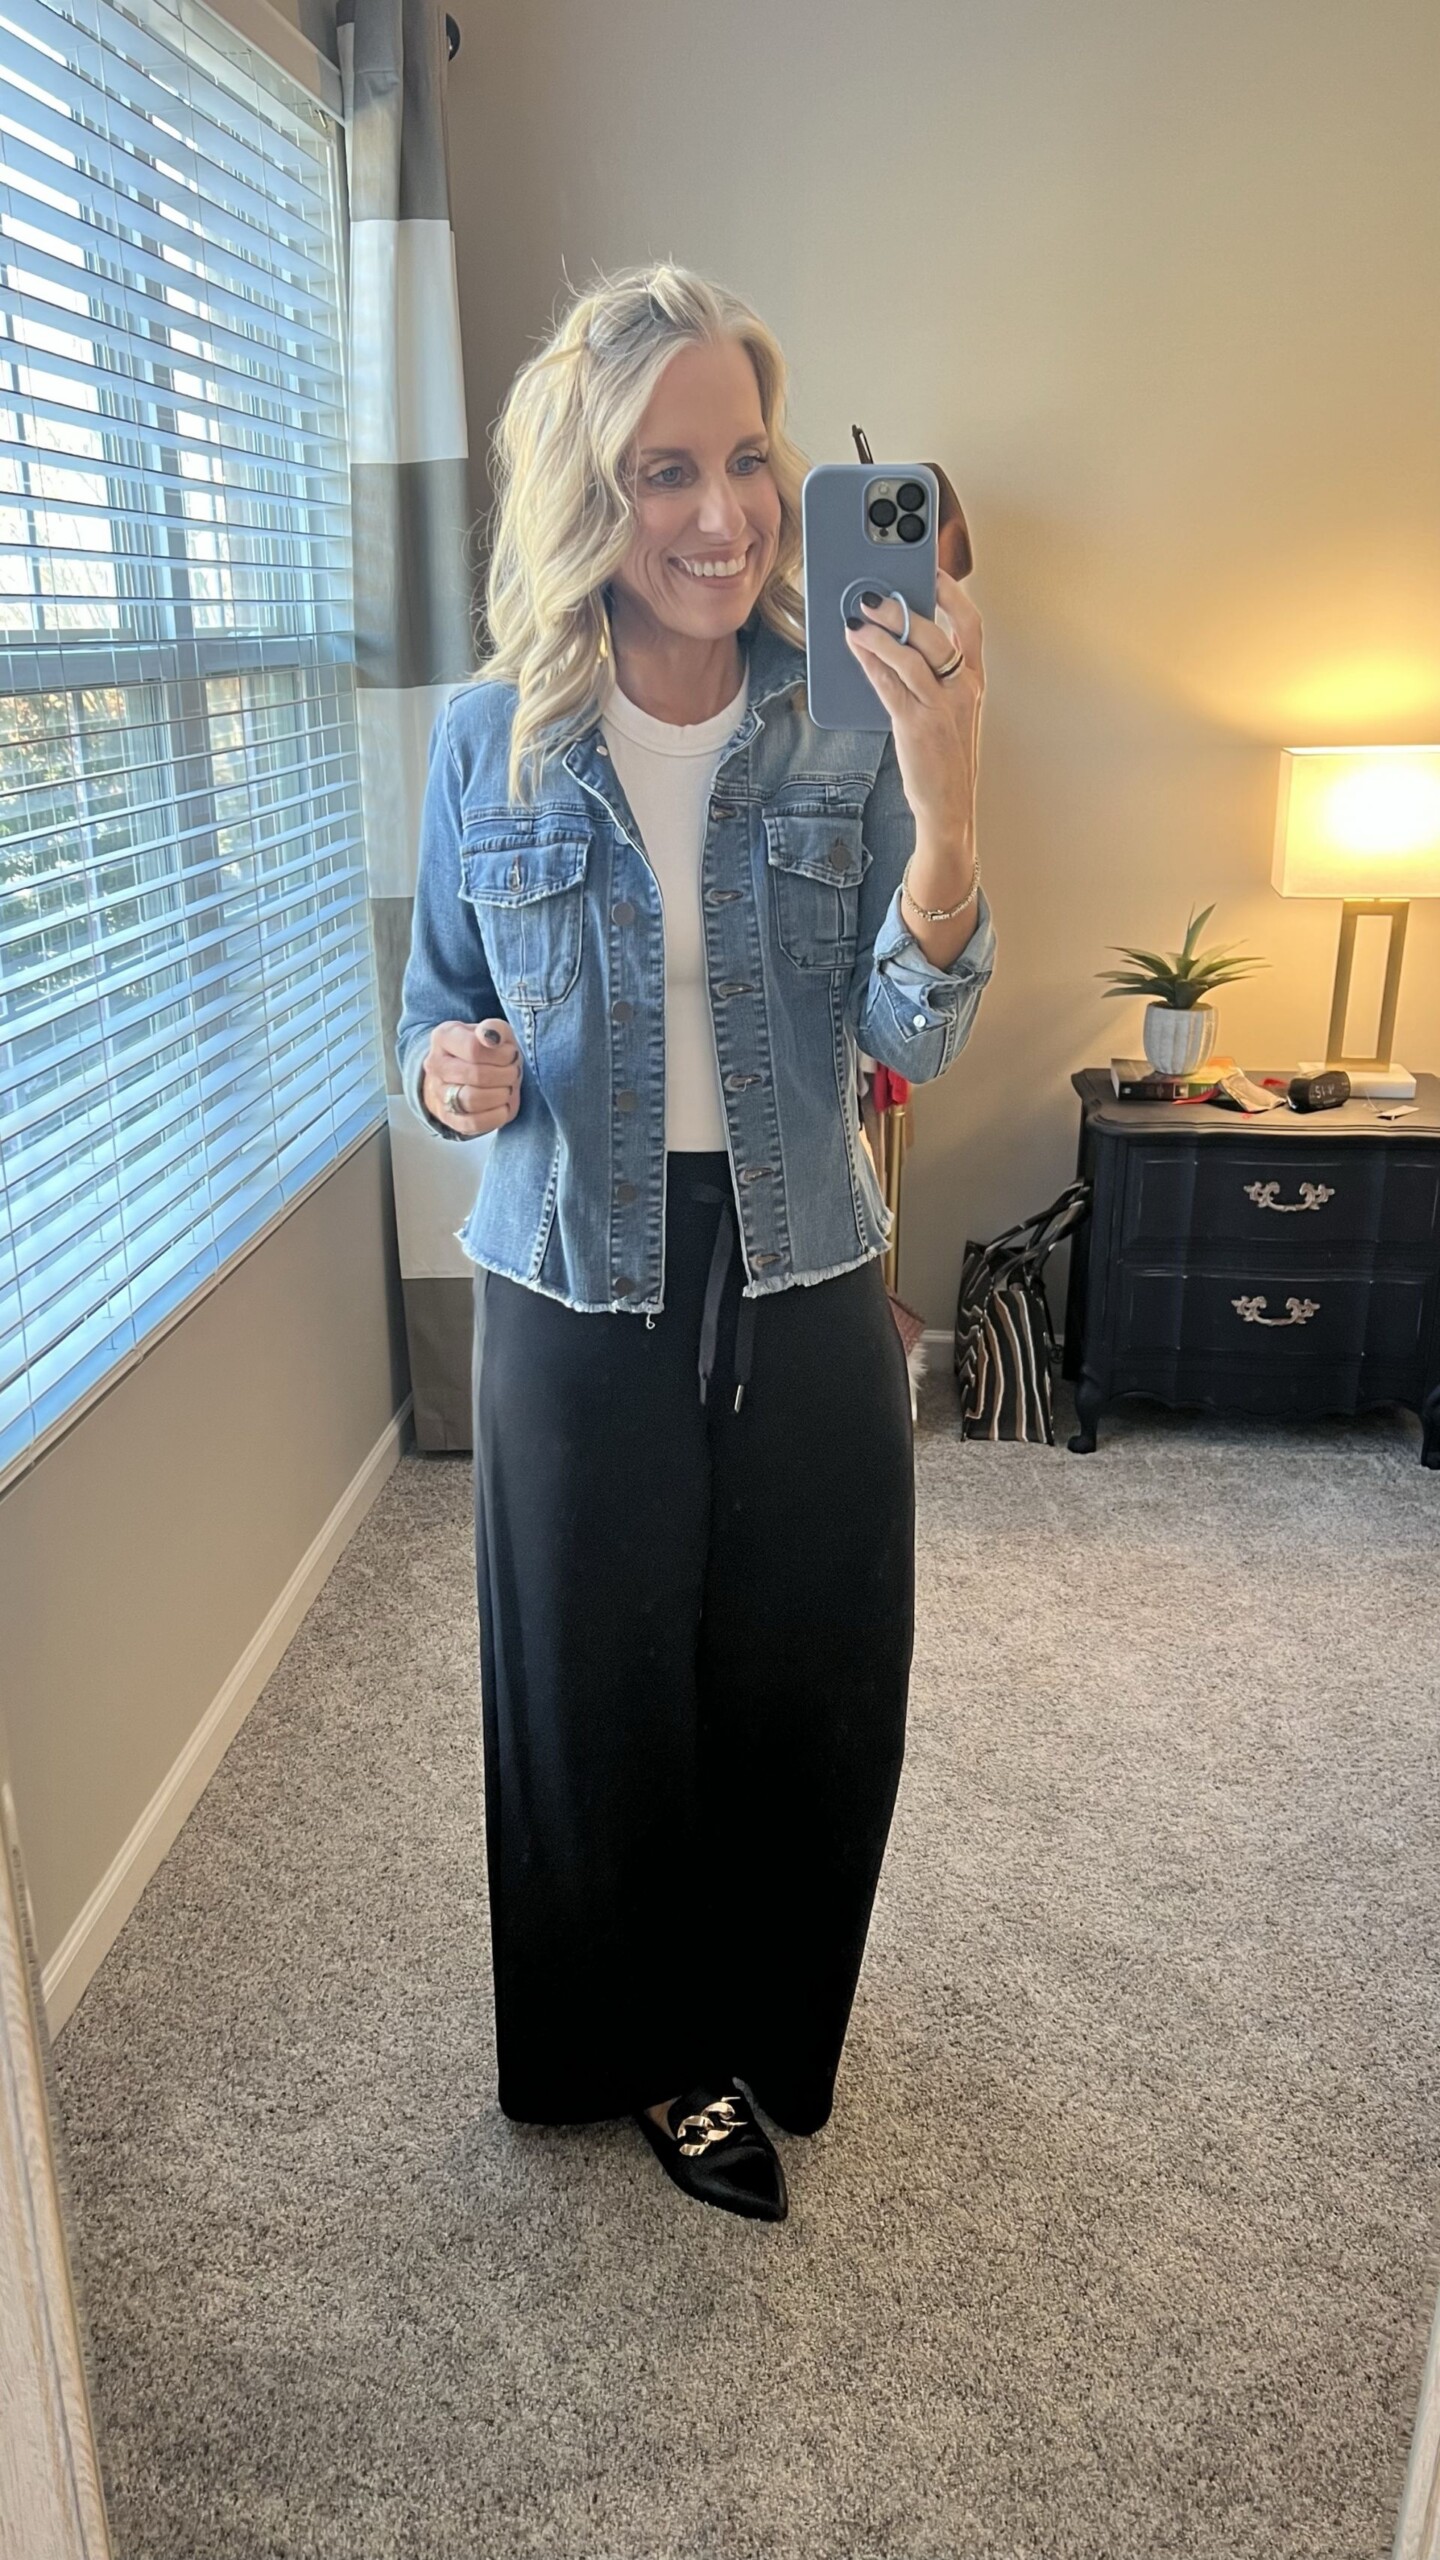 Spanx Air essentials pants FALL OUTFIT IDEAS 